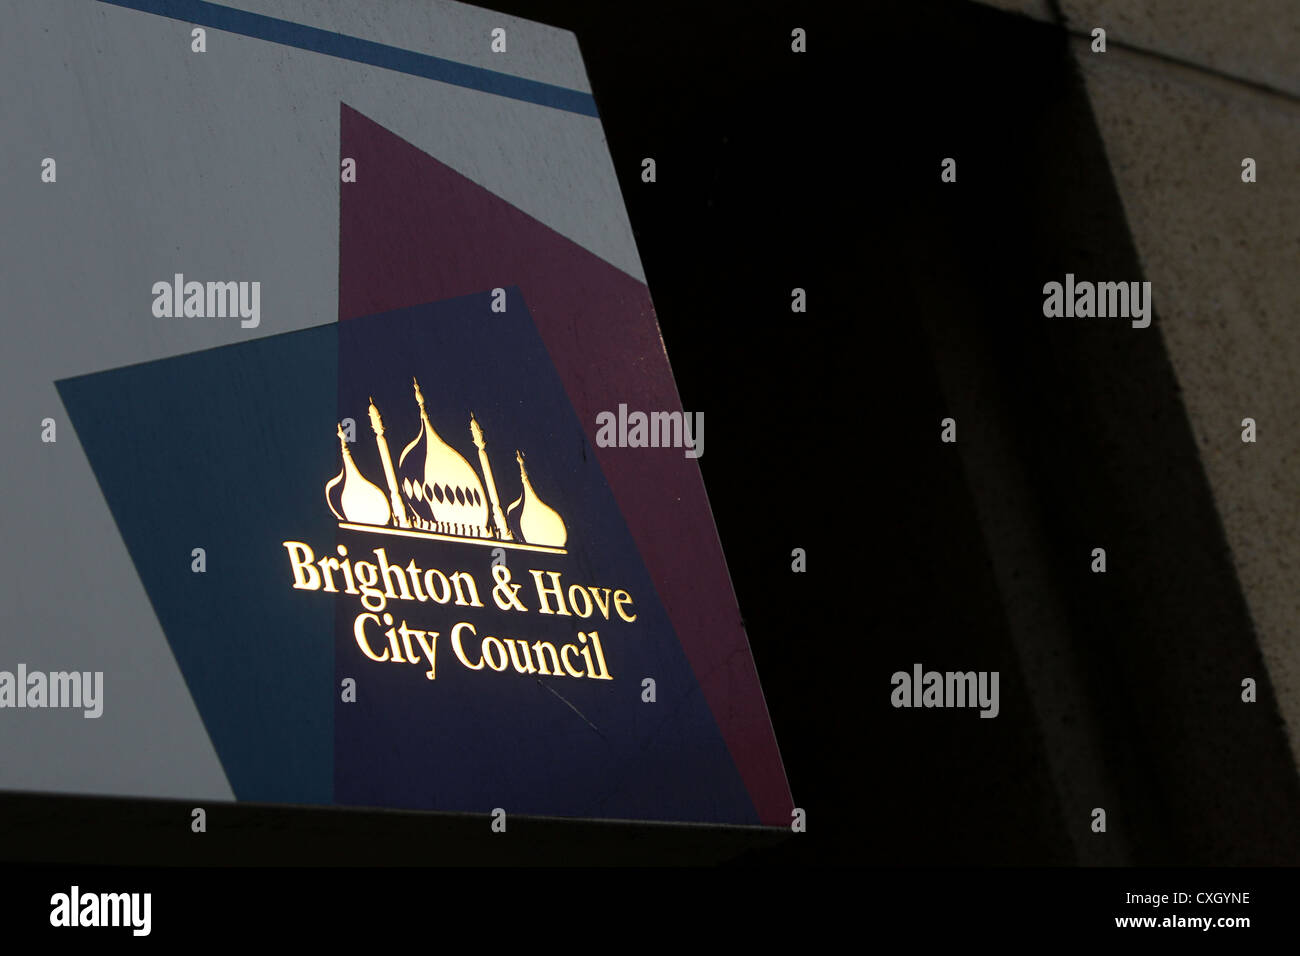 The Brighton & Hove City Council brand and logo on a car park sign in Brighton, East Sussex, UK. Stock Photo